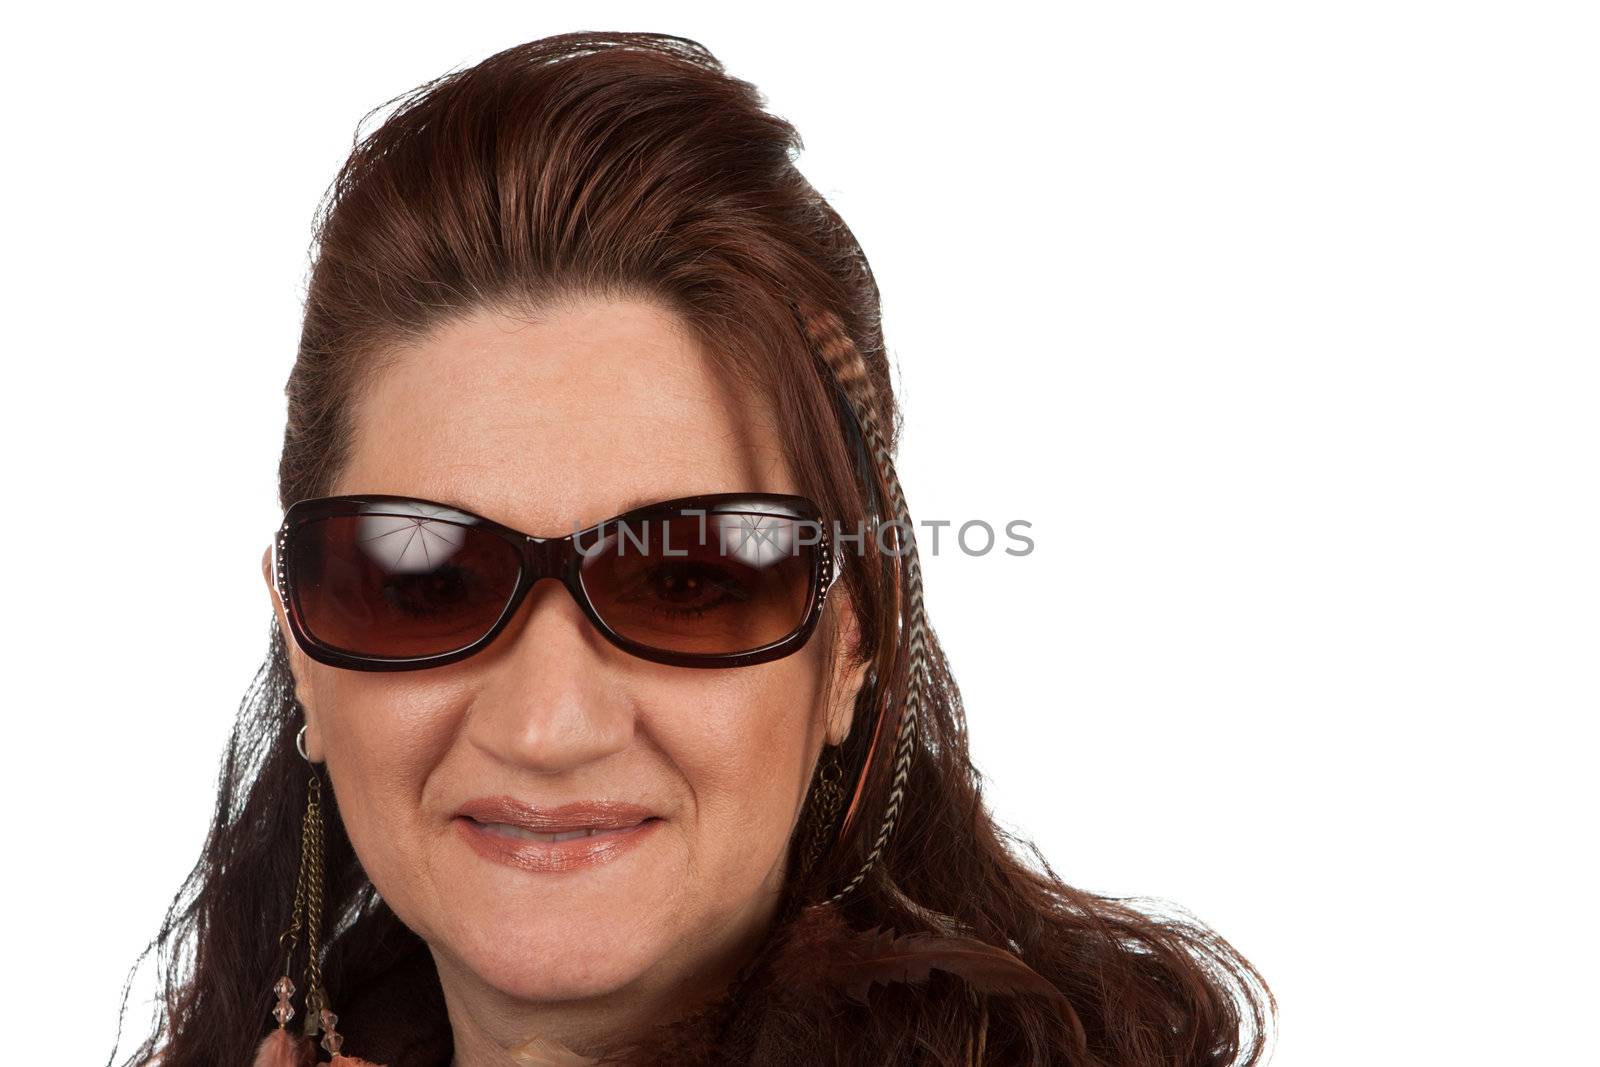 Middle Aged Woman with Sunglasses by graficallyminded